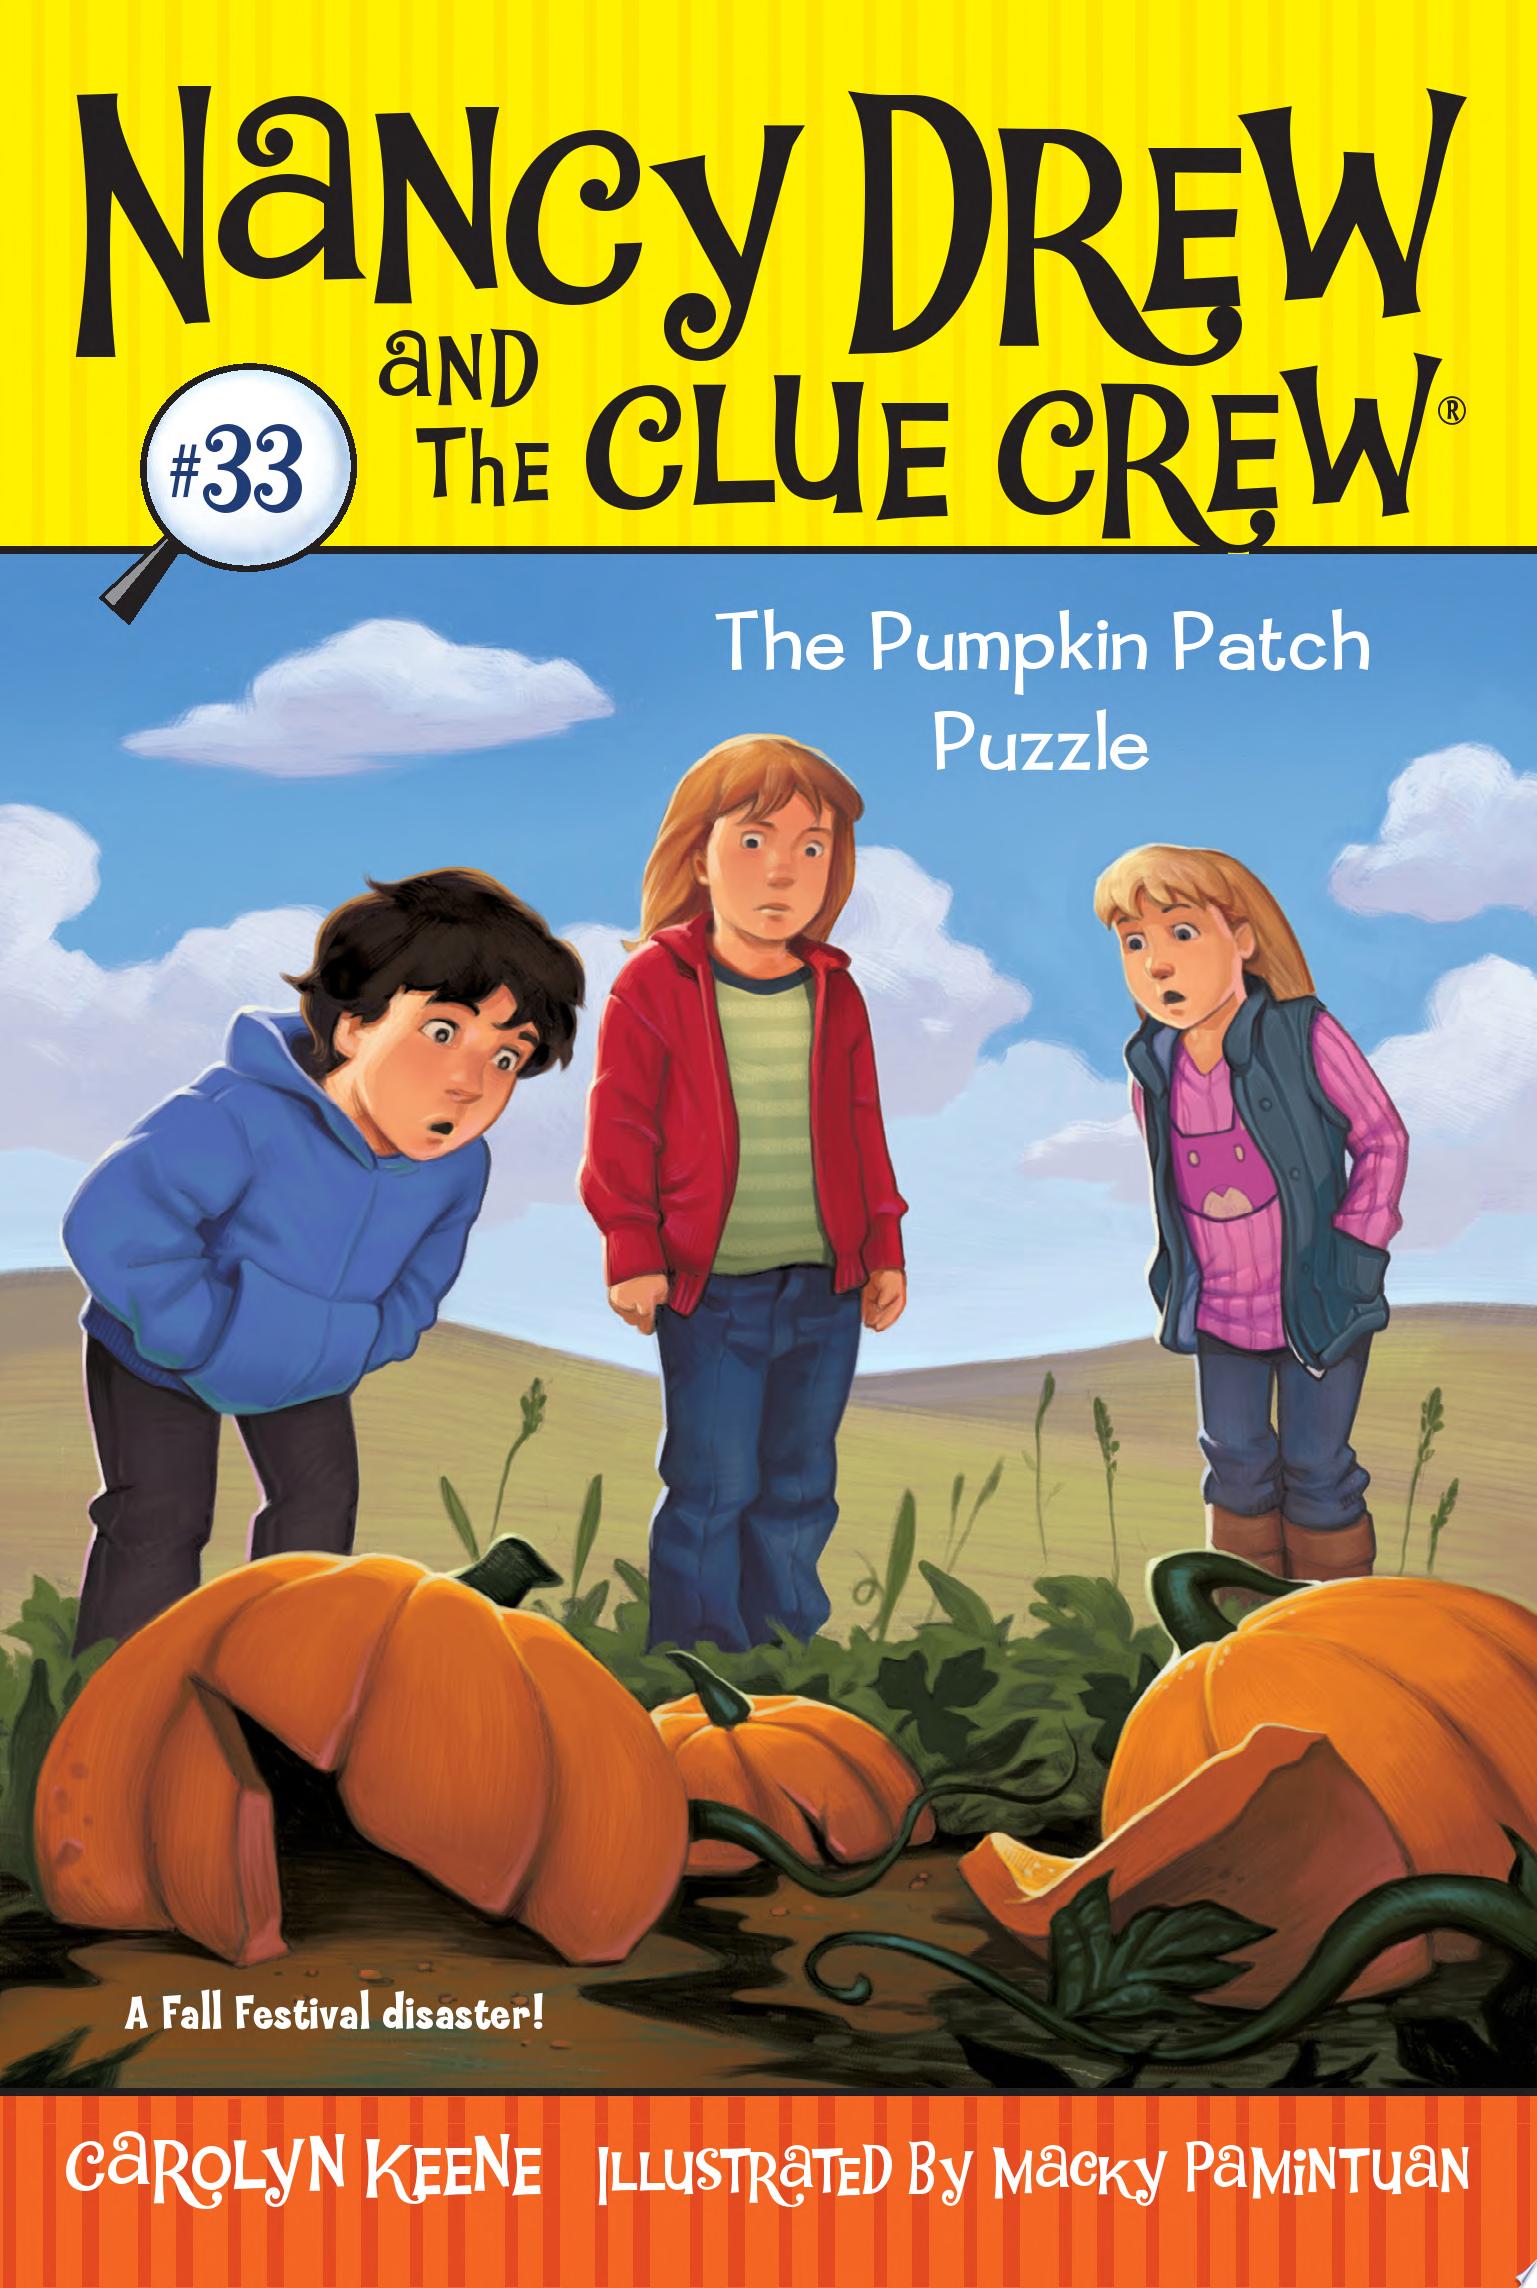 Image for "The Pumpkin Patch Puzzle"